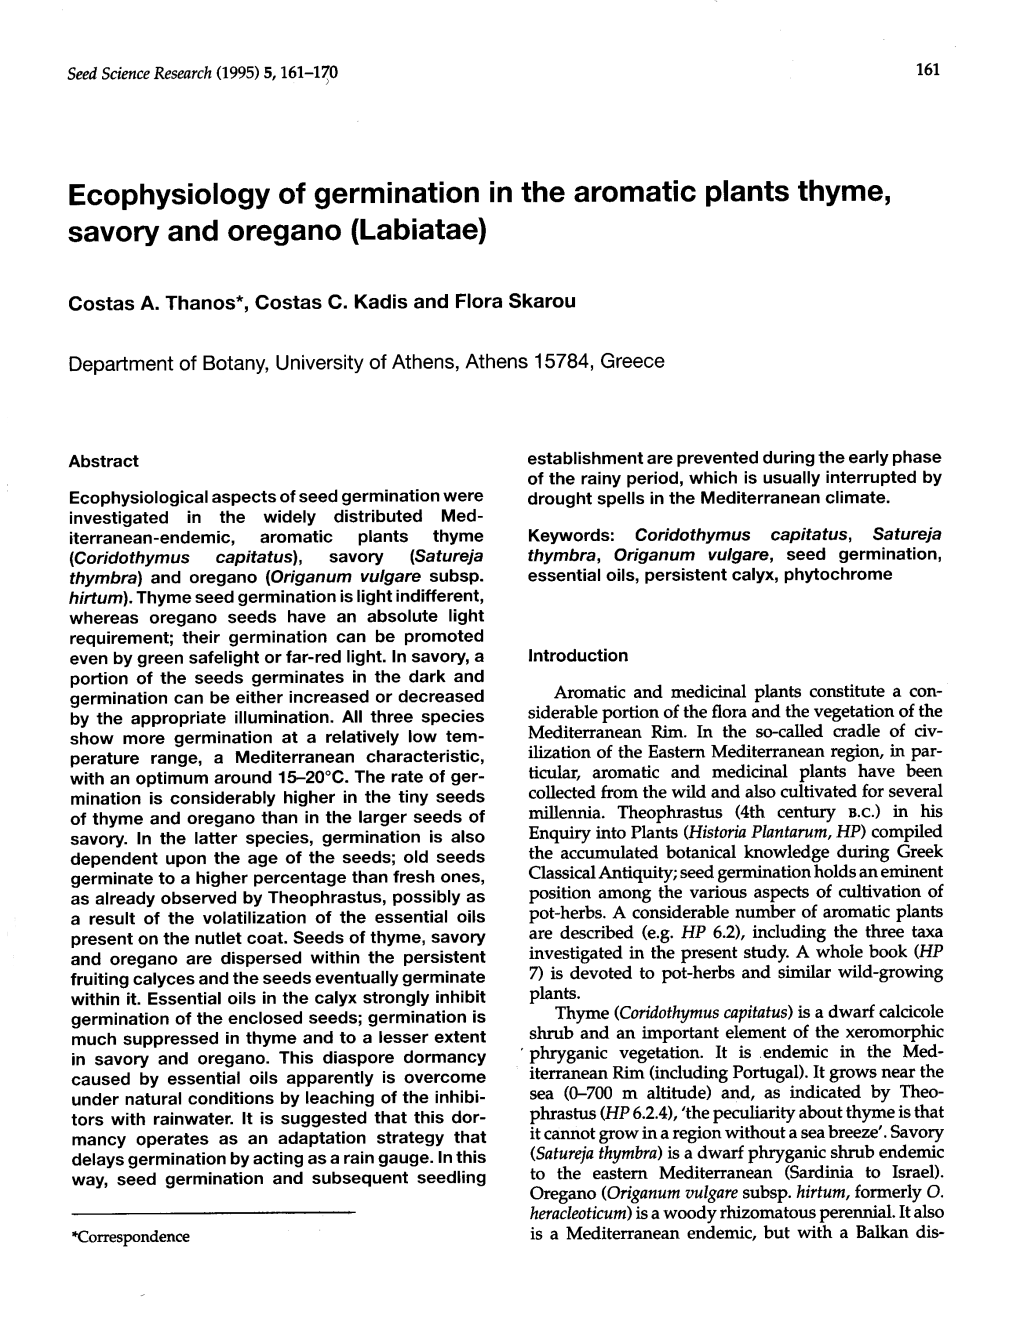 Ecophysiology ΟΙ Germination Ίn the Aromatic Plants Thyme, Savory And